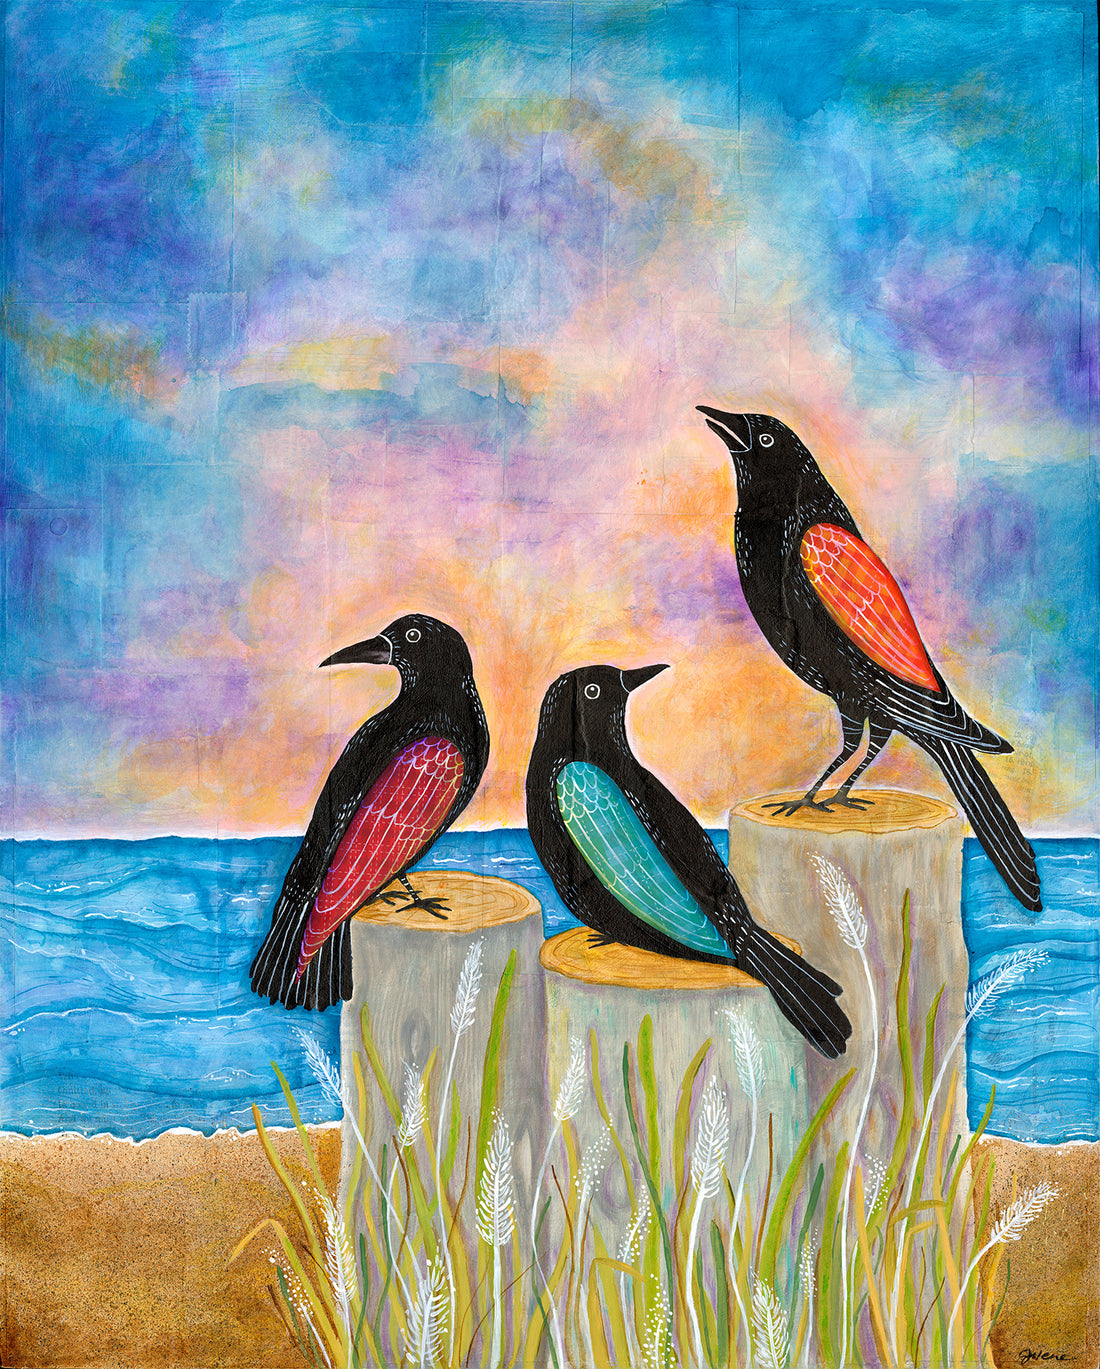 Crows and a tribute to friendship